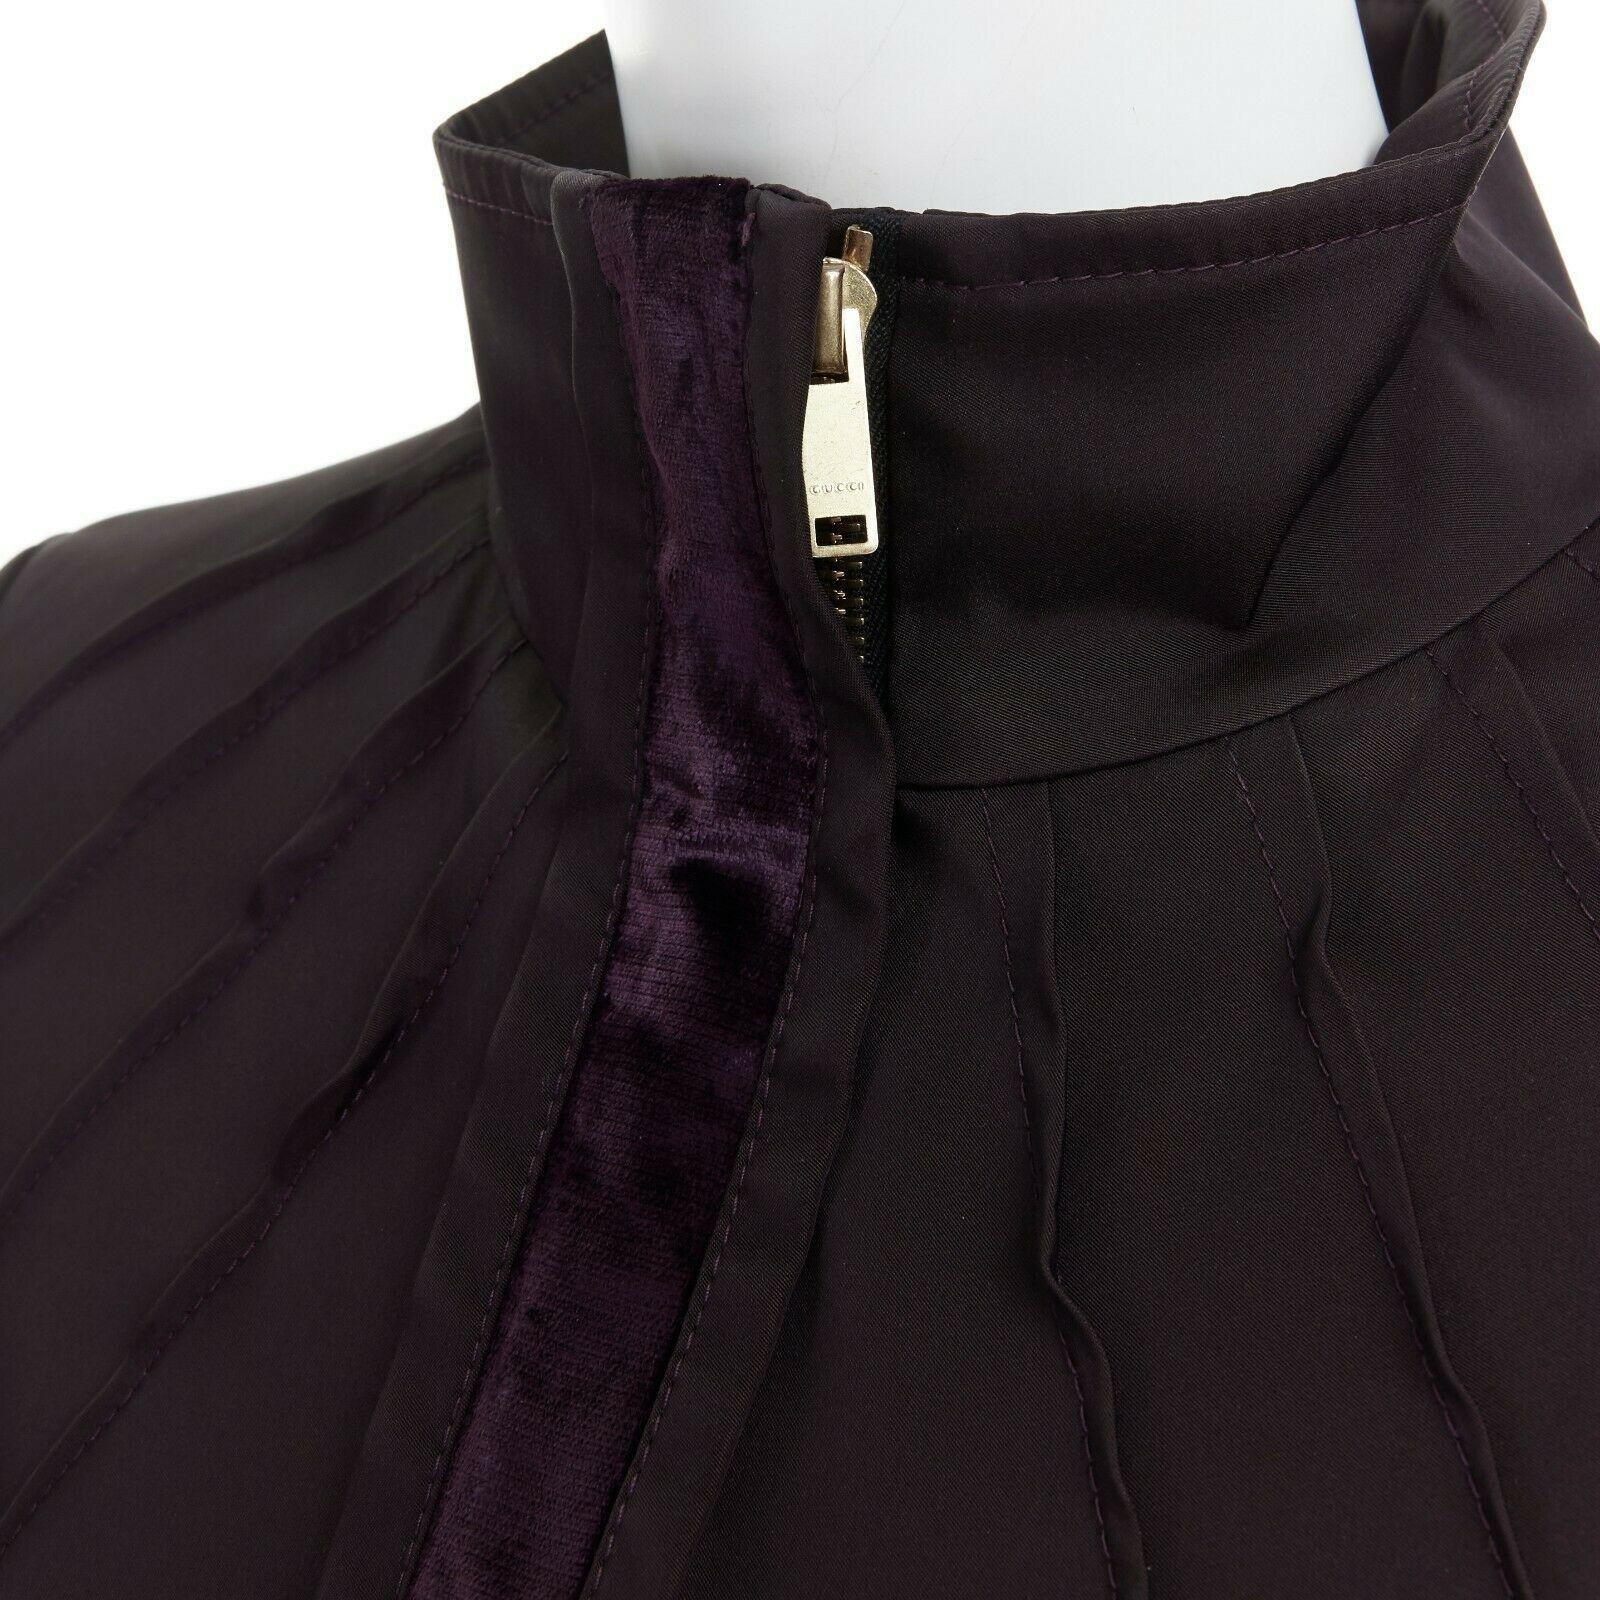 runway GUCCI TOM FORD AW04 purple velvet trimmed ruched zip jacket IT40 US4 UK8
GUCCI BY TOM FORD
FROM THE FALL WINTER 2004 RUNWAY
Acetate, nylon, polyamide, spandex, elasthane. Dark aubergine purple. 
Pleated at shoulder. Lightly padded shoulders.